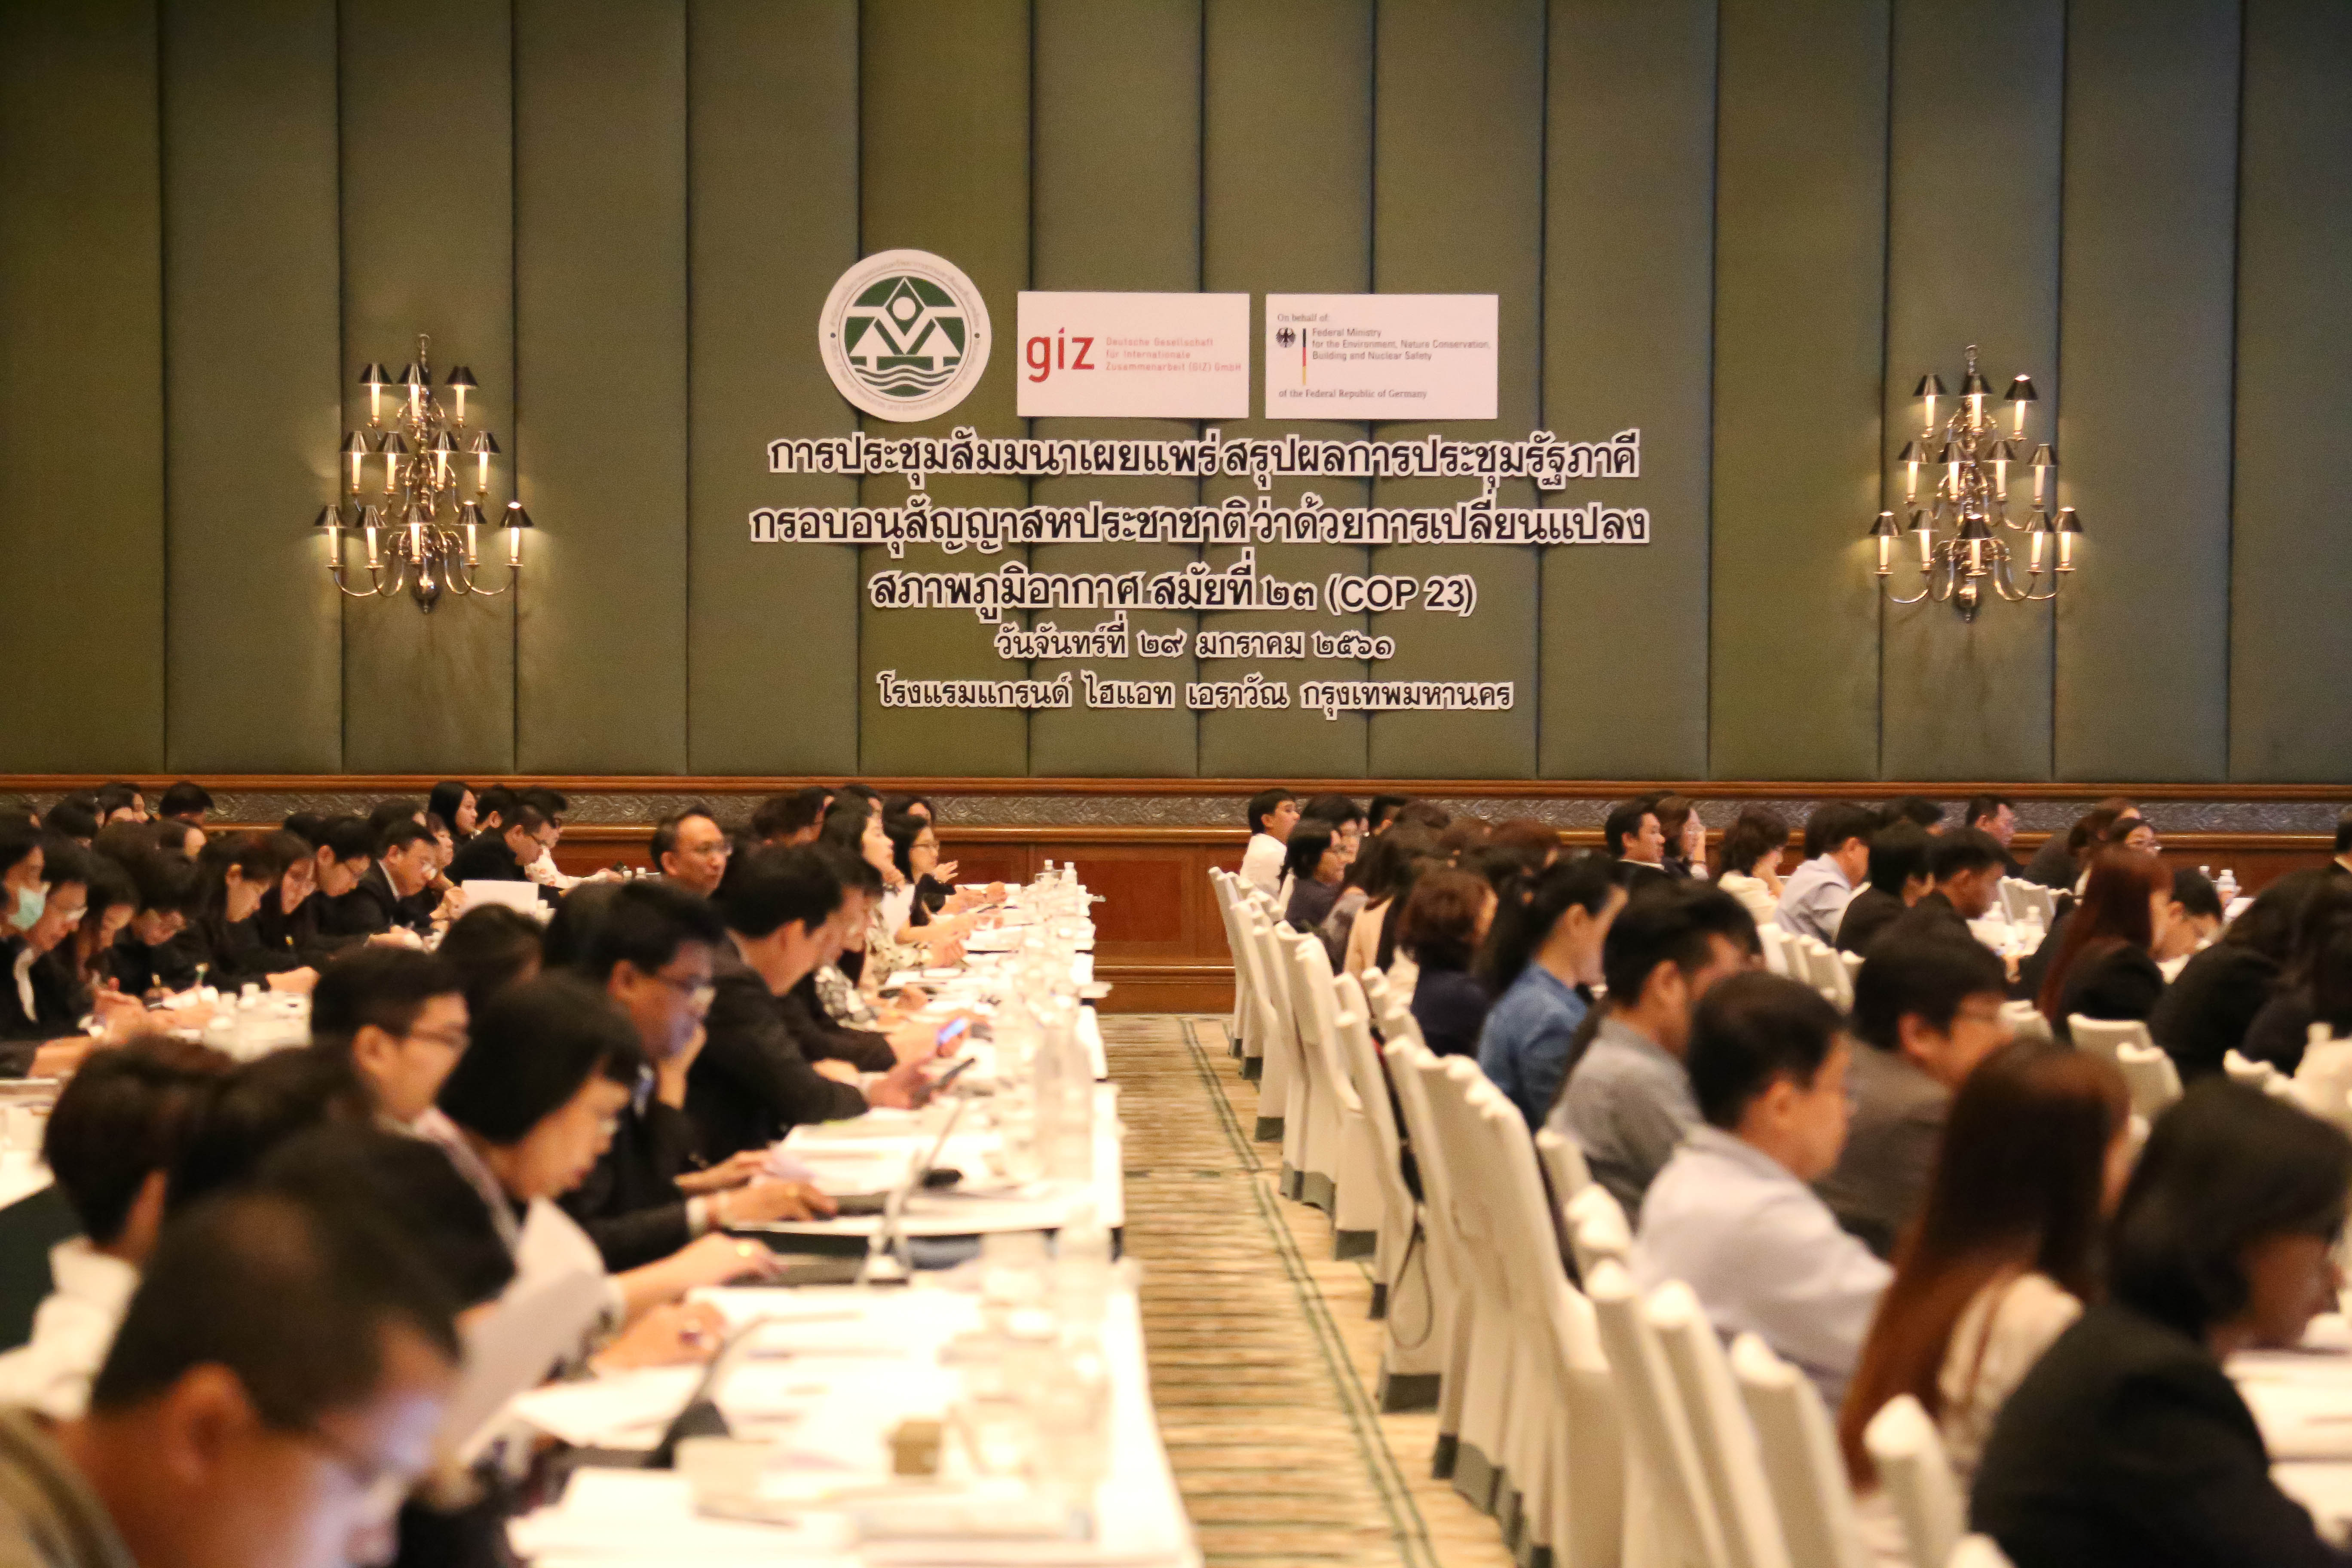 Thai experts and representatives of authorities meet to hear and discuss the outcome of COP23